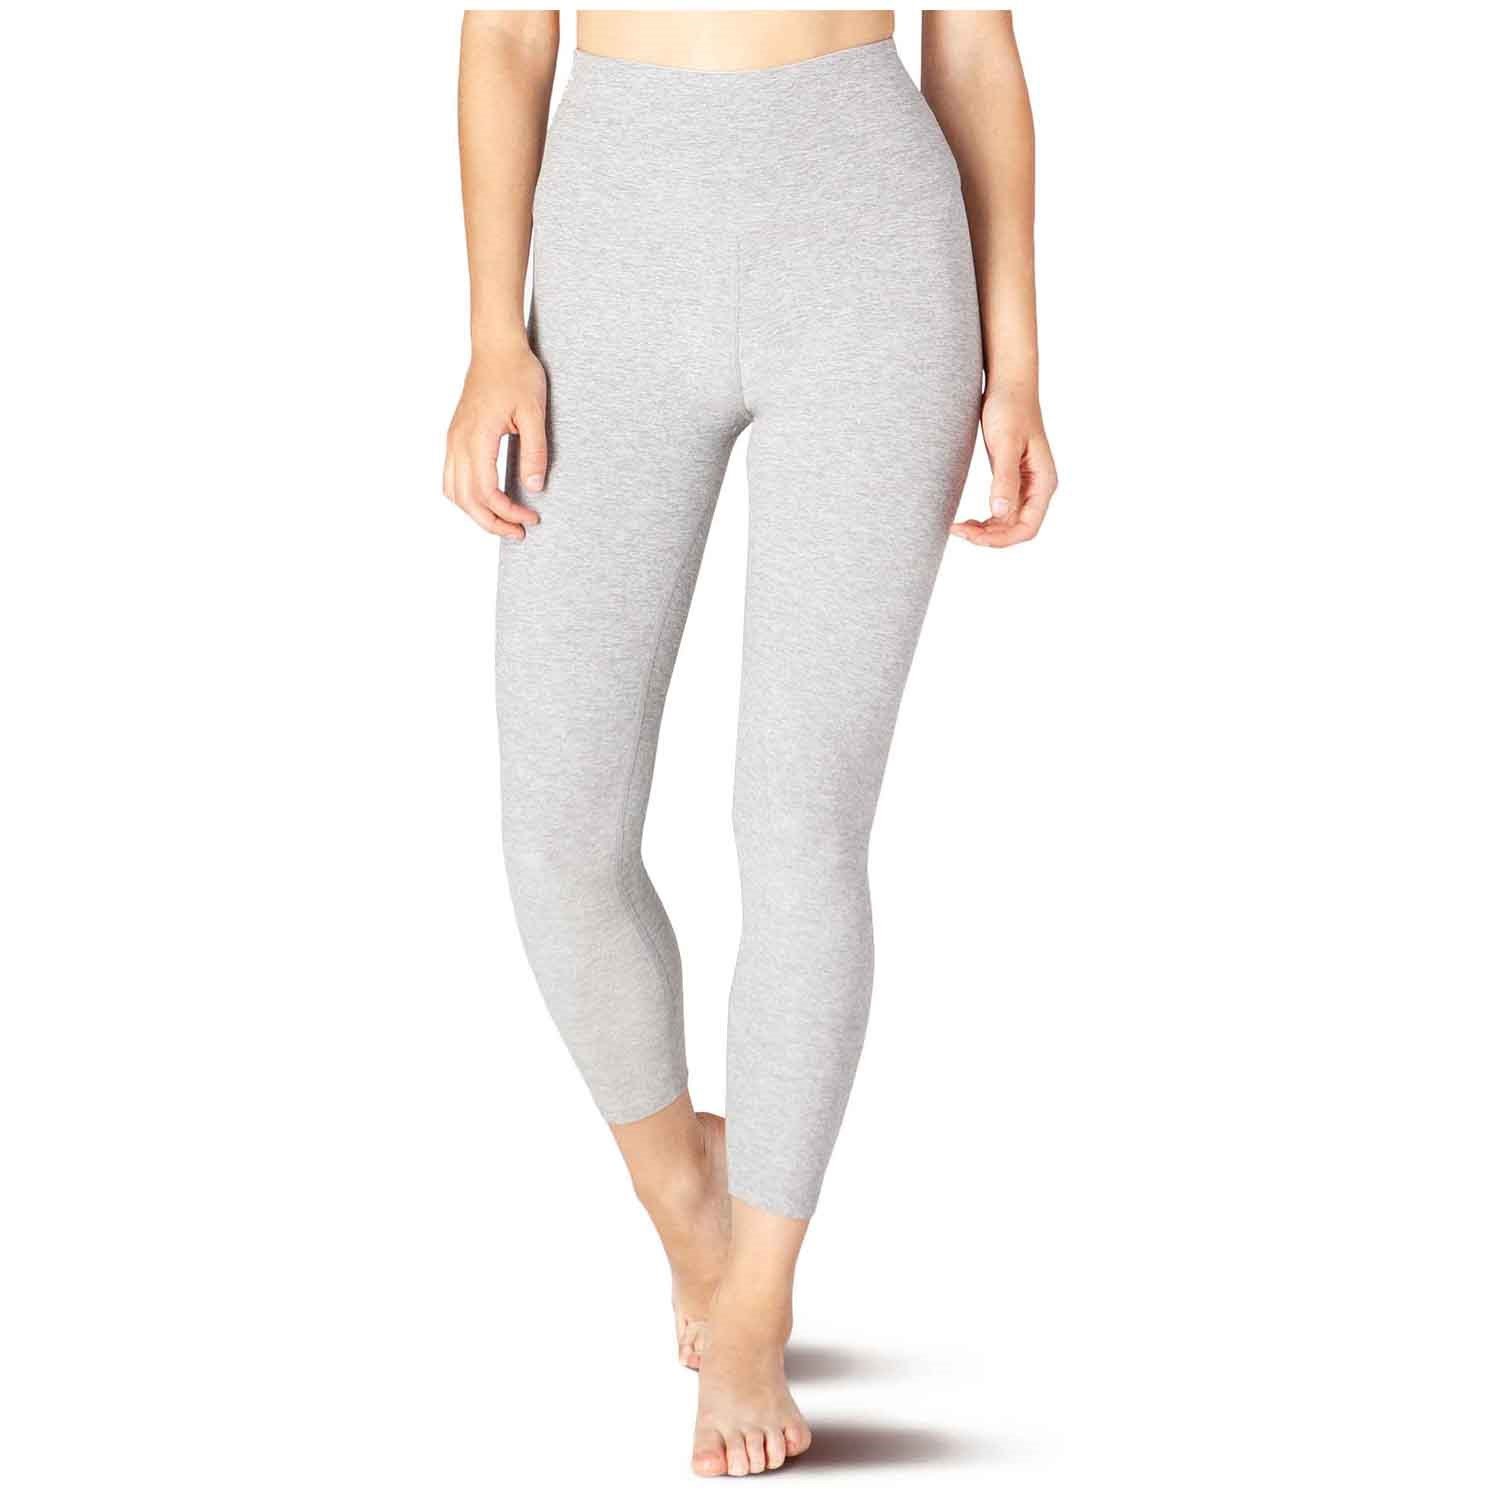 Beyond Yoga Out of Pocket High-Waisted Midi Leggings in Spacedye